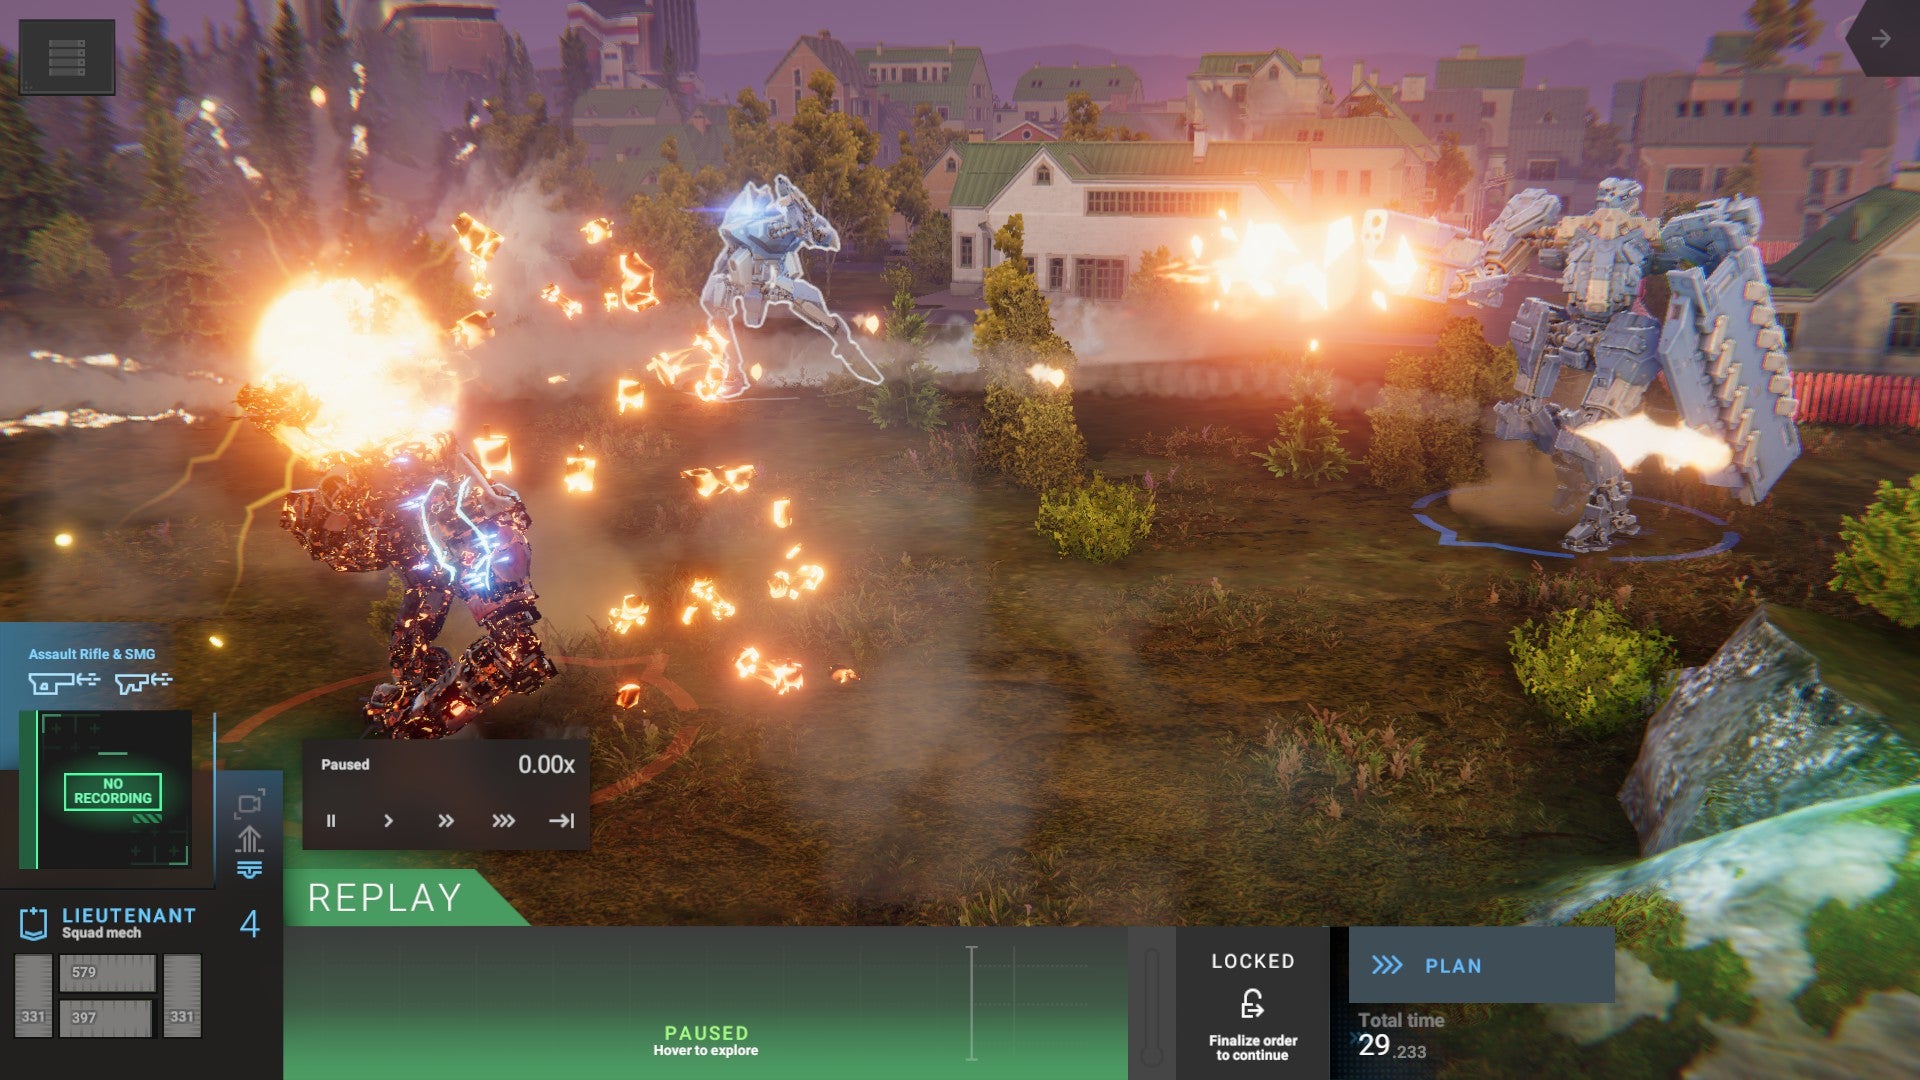 Three mechs have an explosive stand off in Phantom Brigade